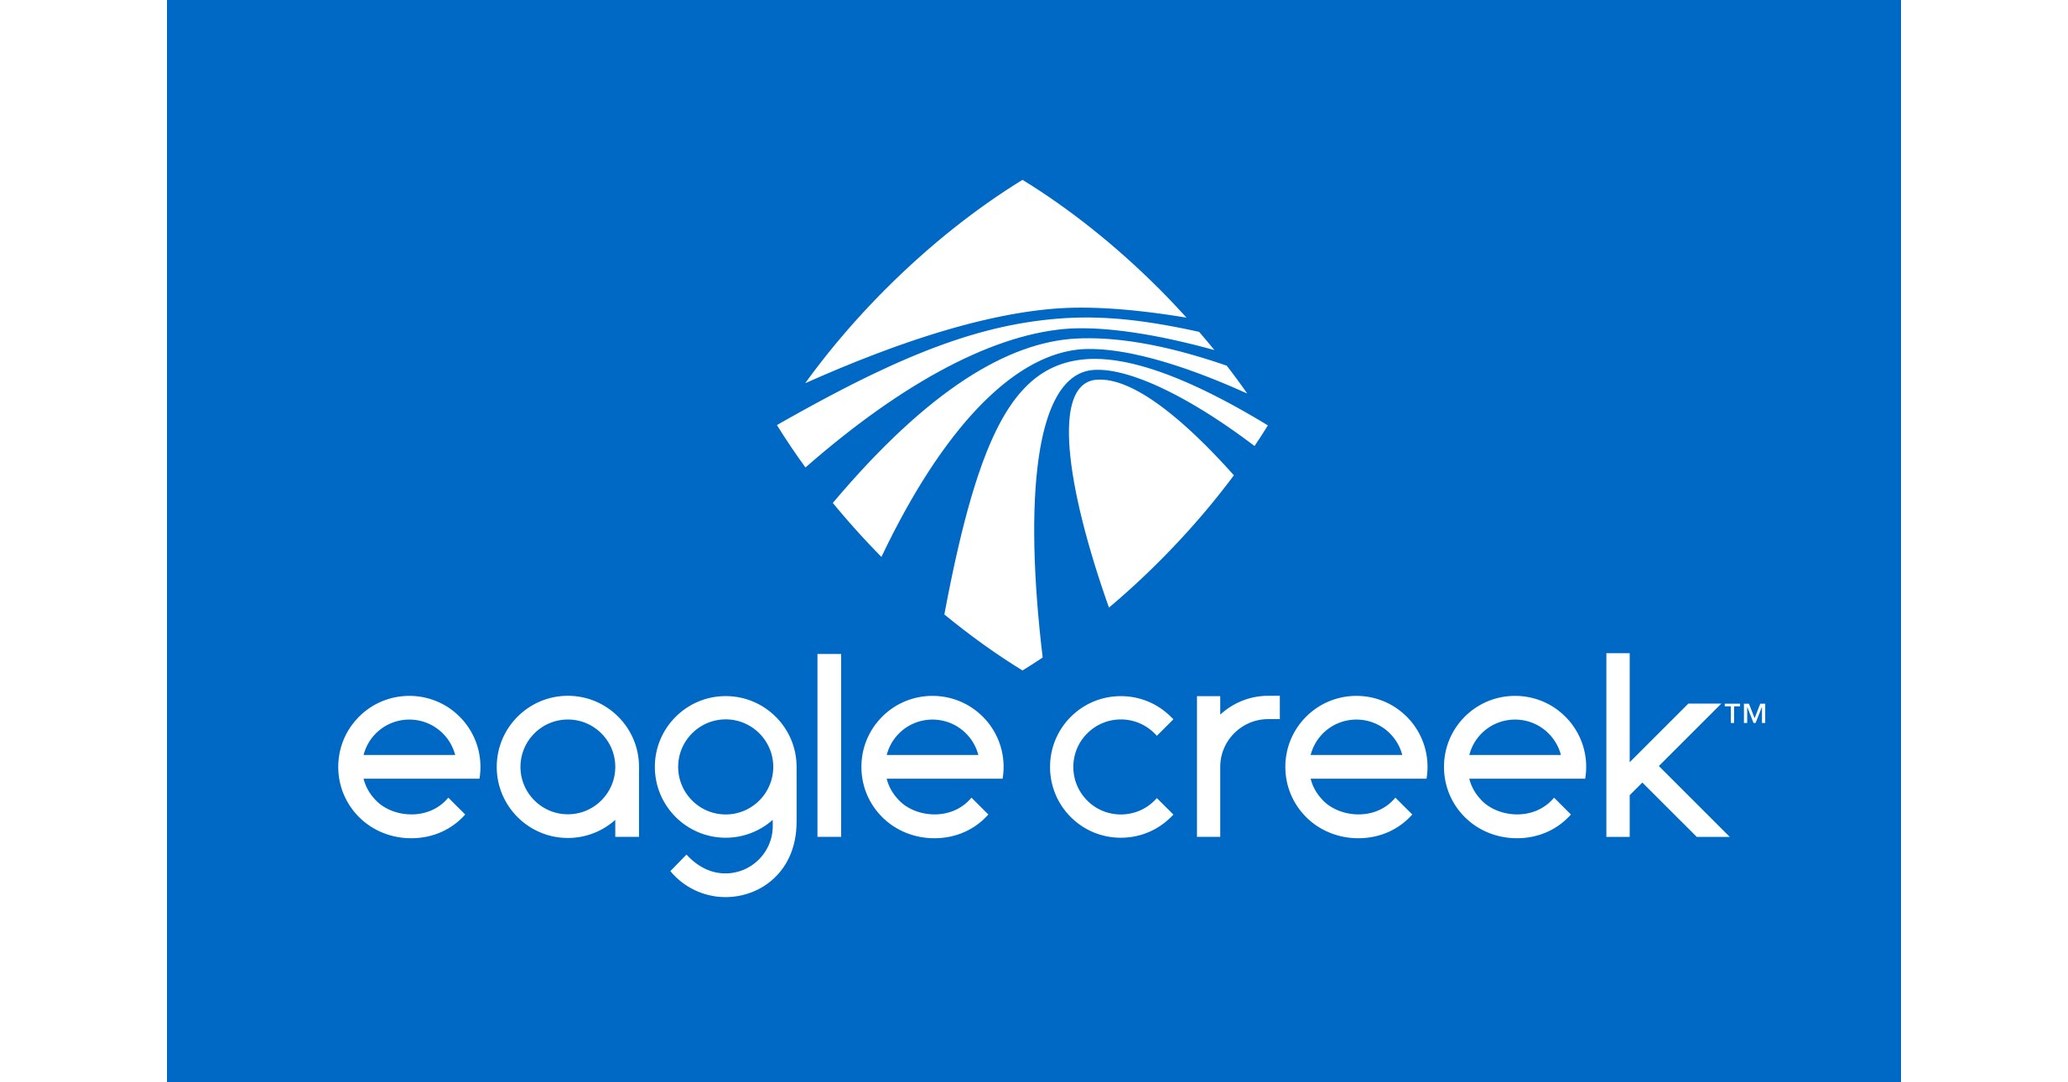 Eagle Creek - Looking Inside a 46-Year-Old Startup